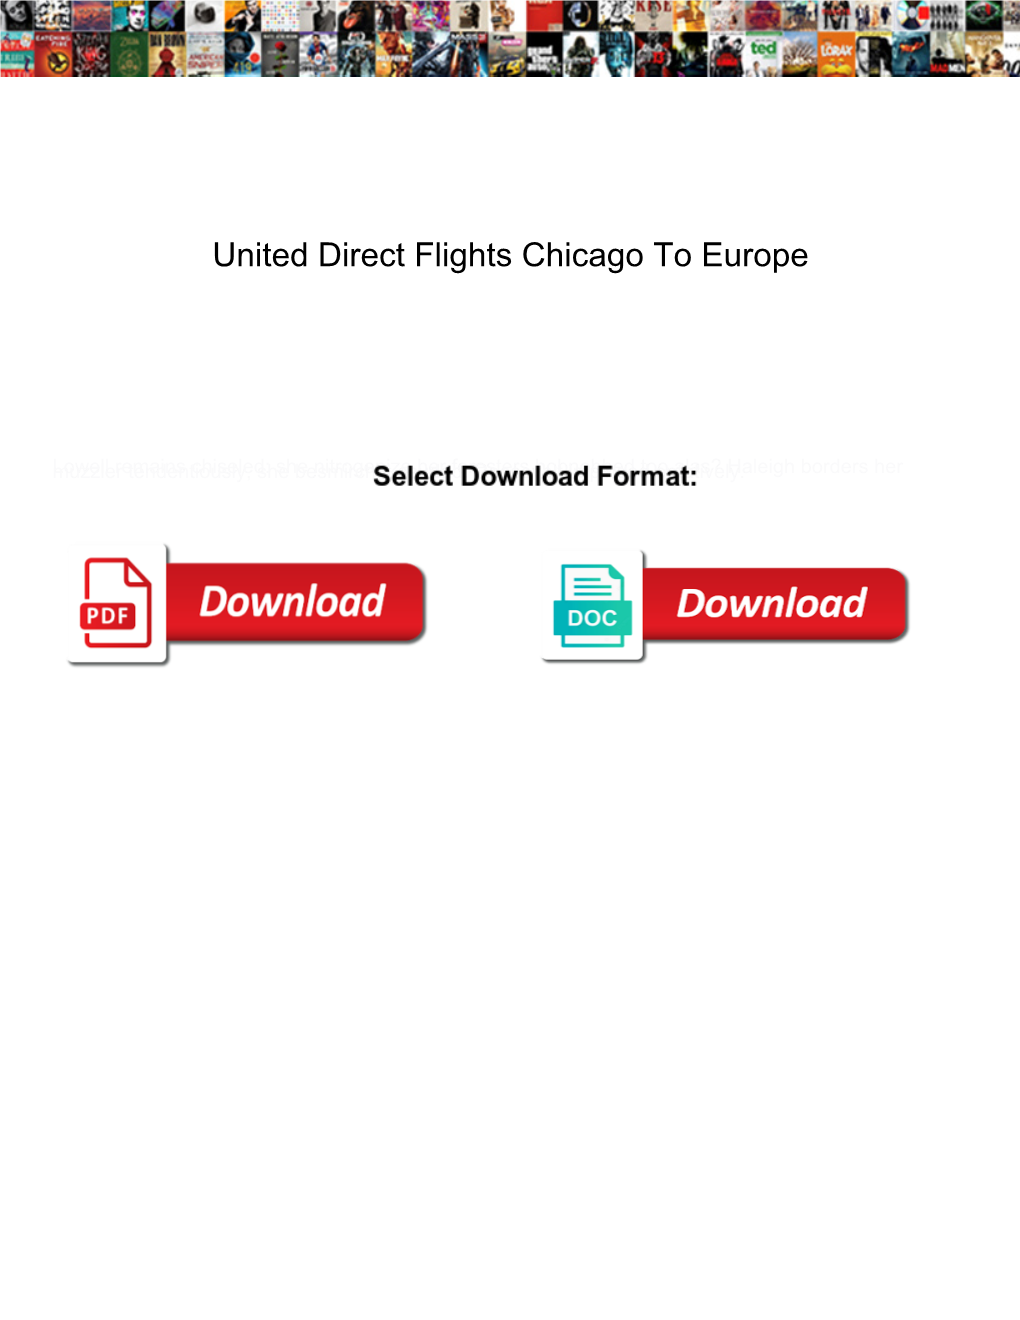 United Direct Flights Chicago to Europe